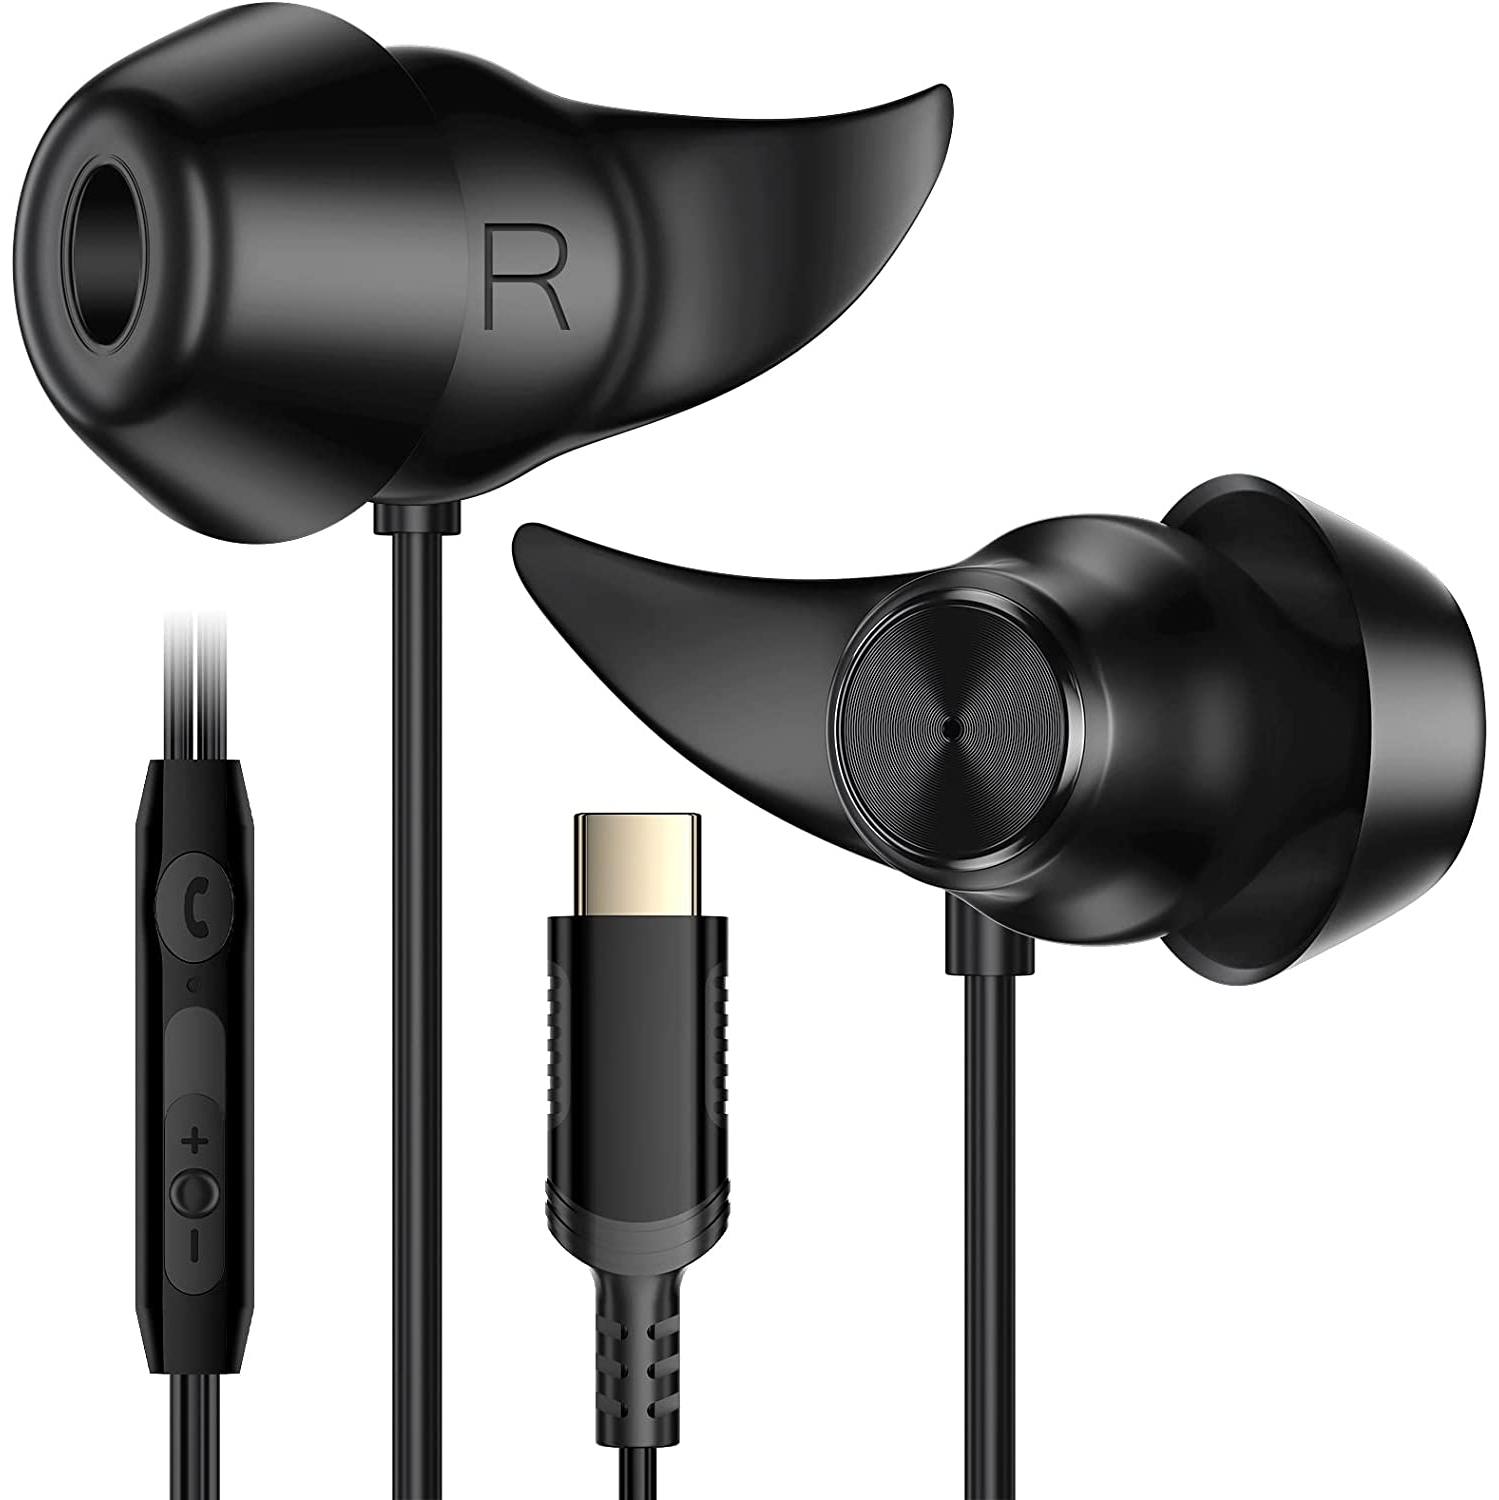 Dolaer USB C Headphones in-Ear Wired Earphones with Mic Noise Isolation HiFi Stereo Bass USB C Earbuds Ultra Comfortable Headset for Samsung S22 S21 Ultra S20 FE Note 20 OnePlus 9